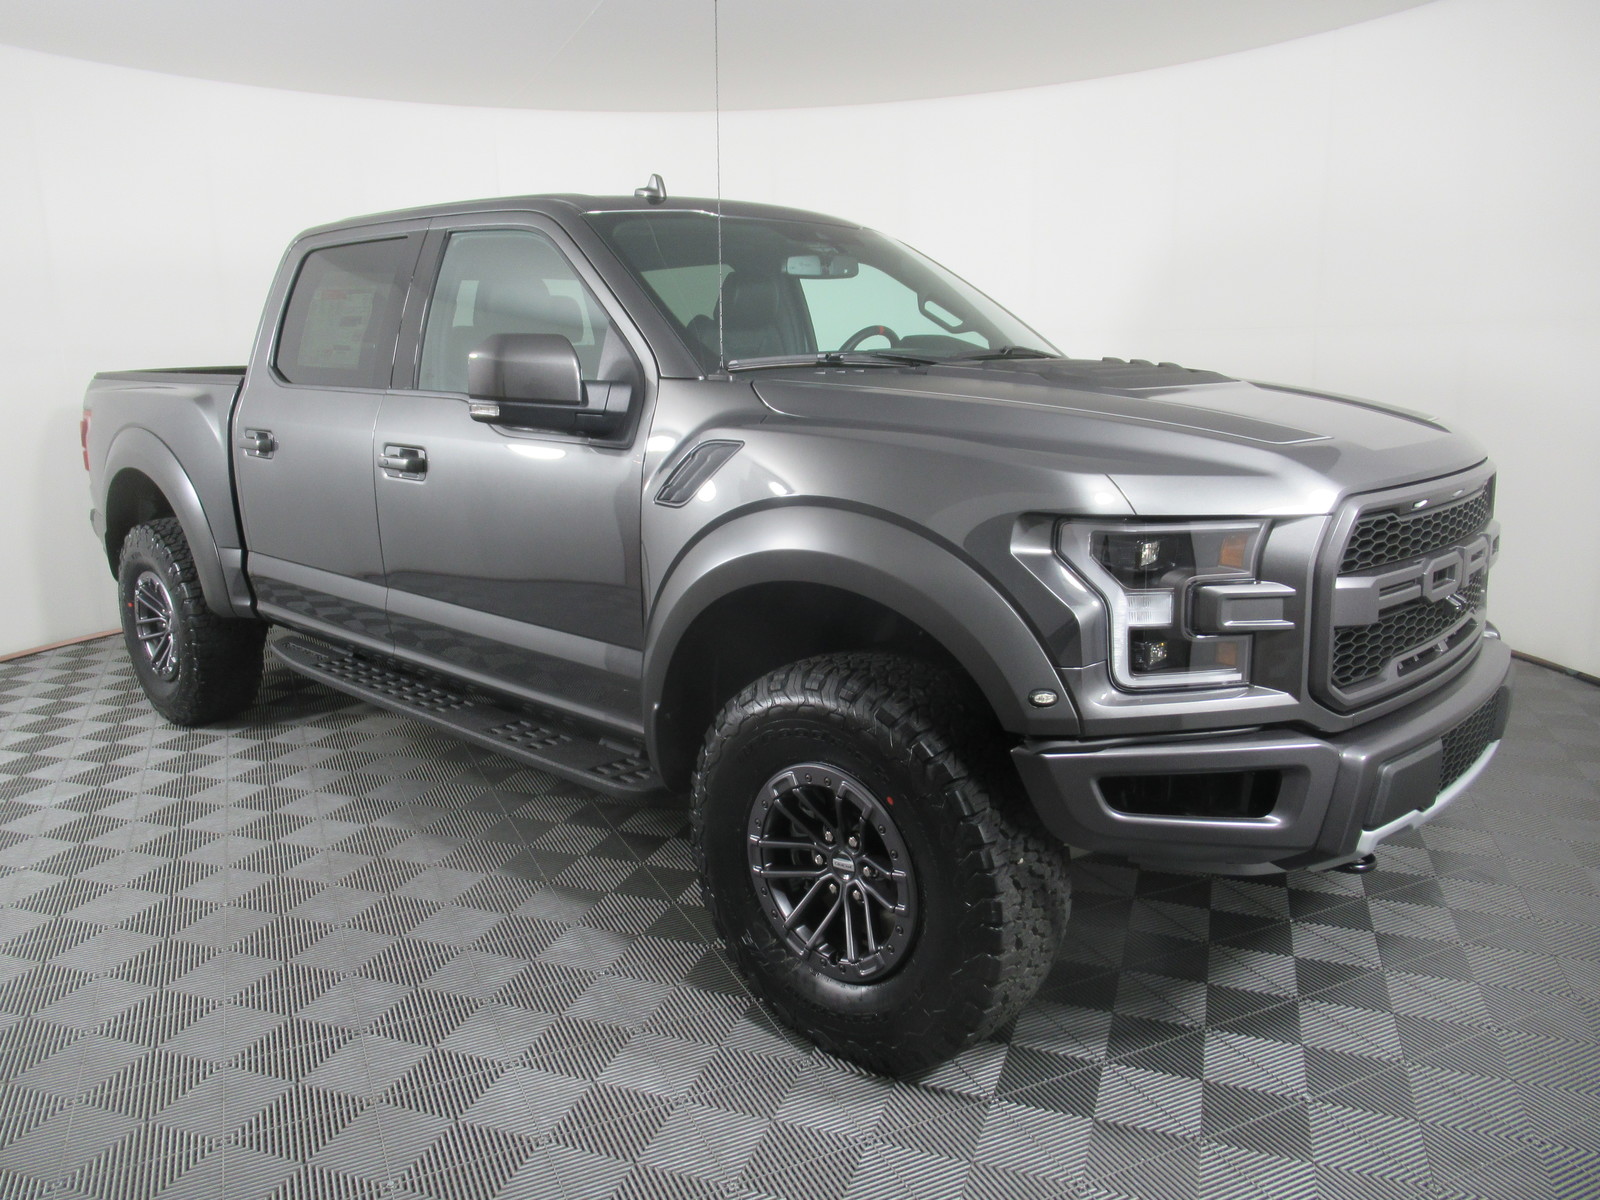 New 2020 Ford F-150 Raptor 4WD SuperCrew 5.5' Box Crew Cab Pickup in ...